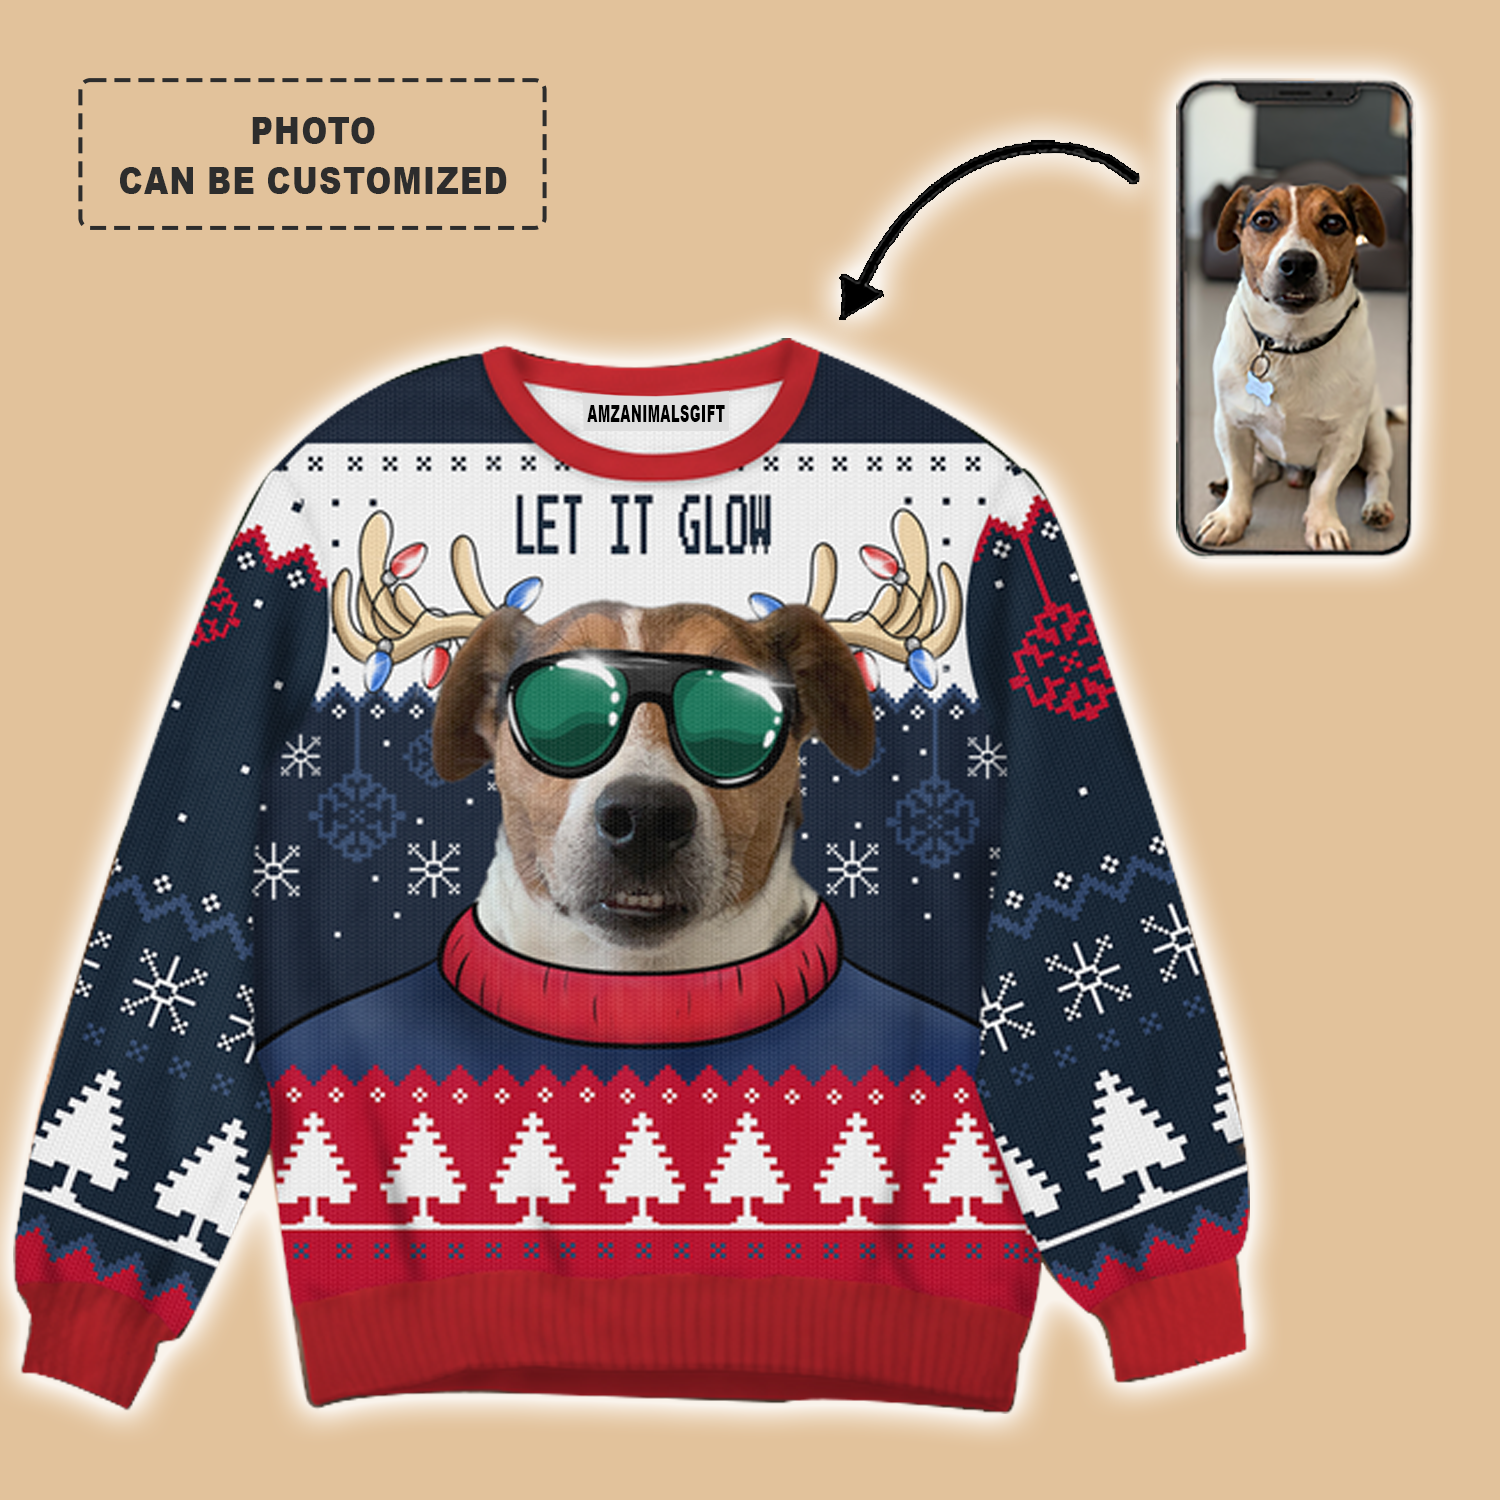 Dog Cat Pet Ugly Christmas Sweater Let It Glow Customized Photo, Outfit For Men Women On Christmas, New Year, Autumn, Winter